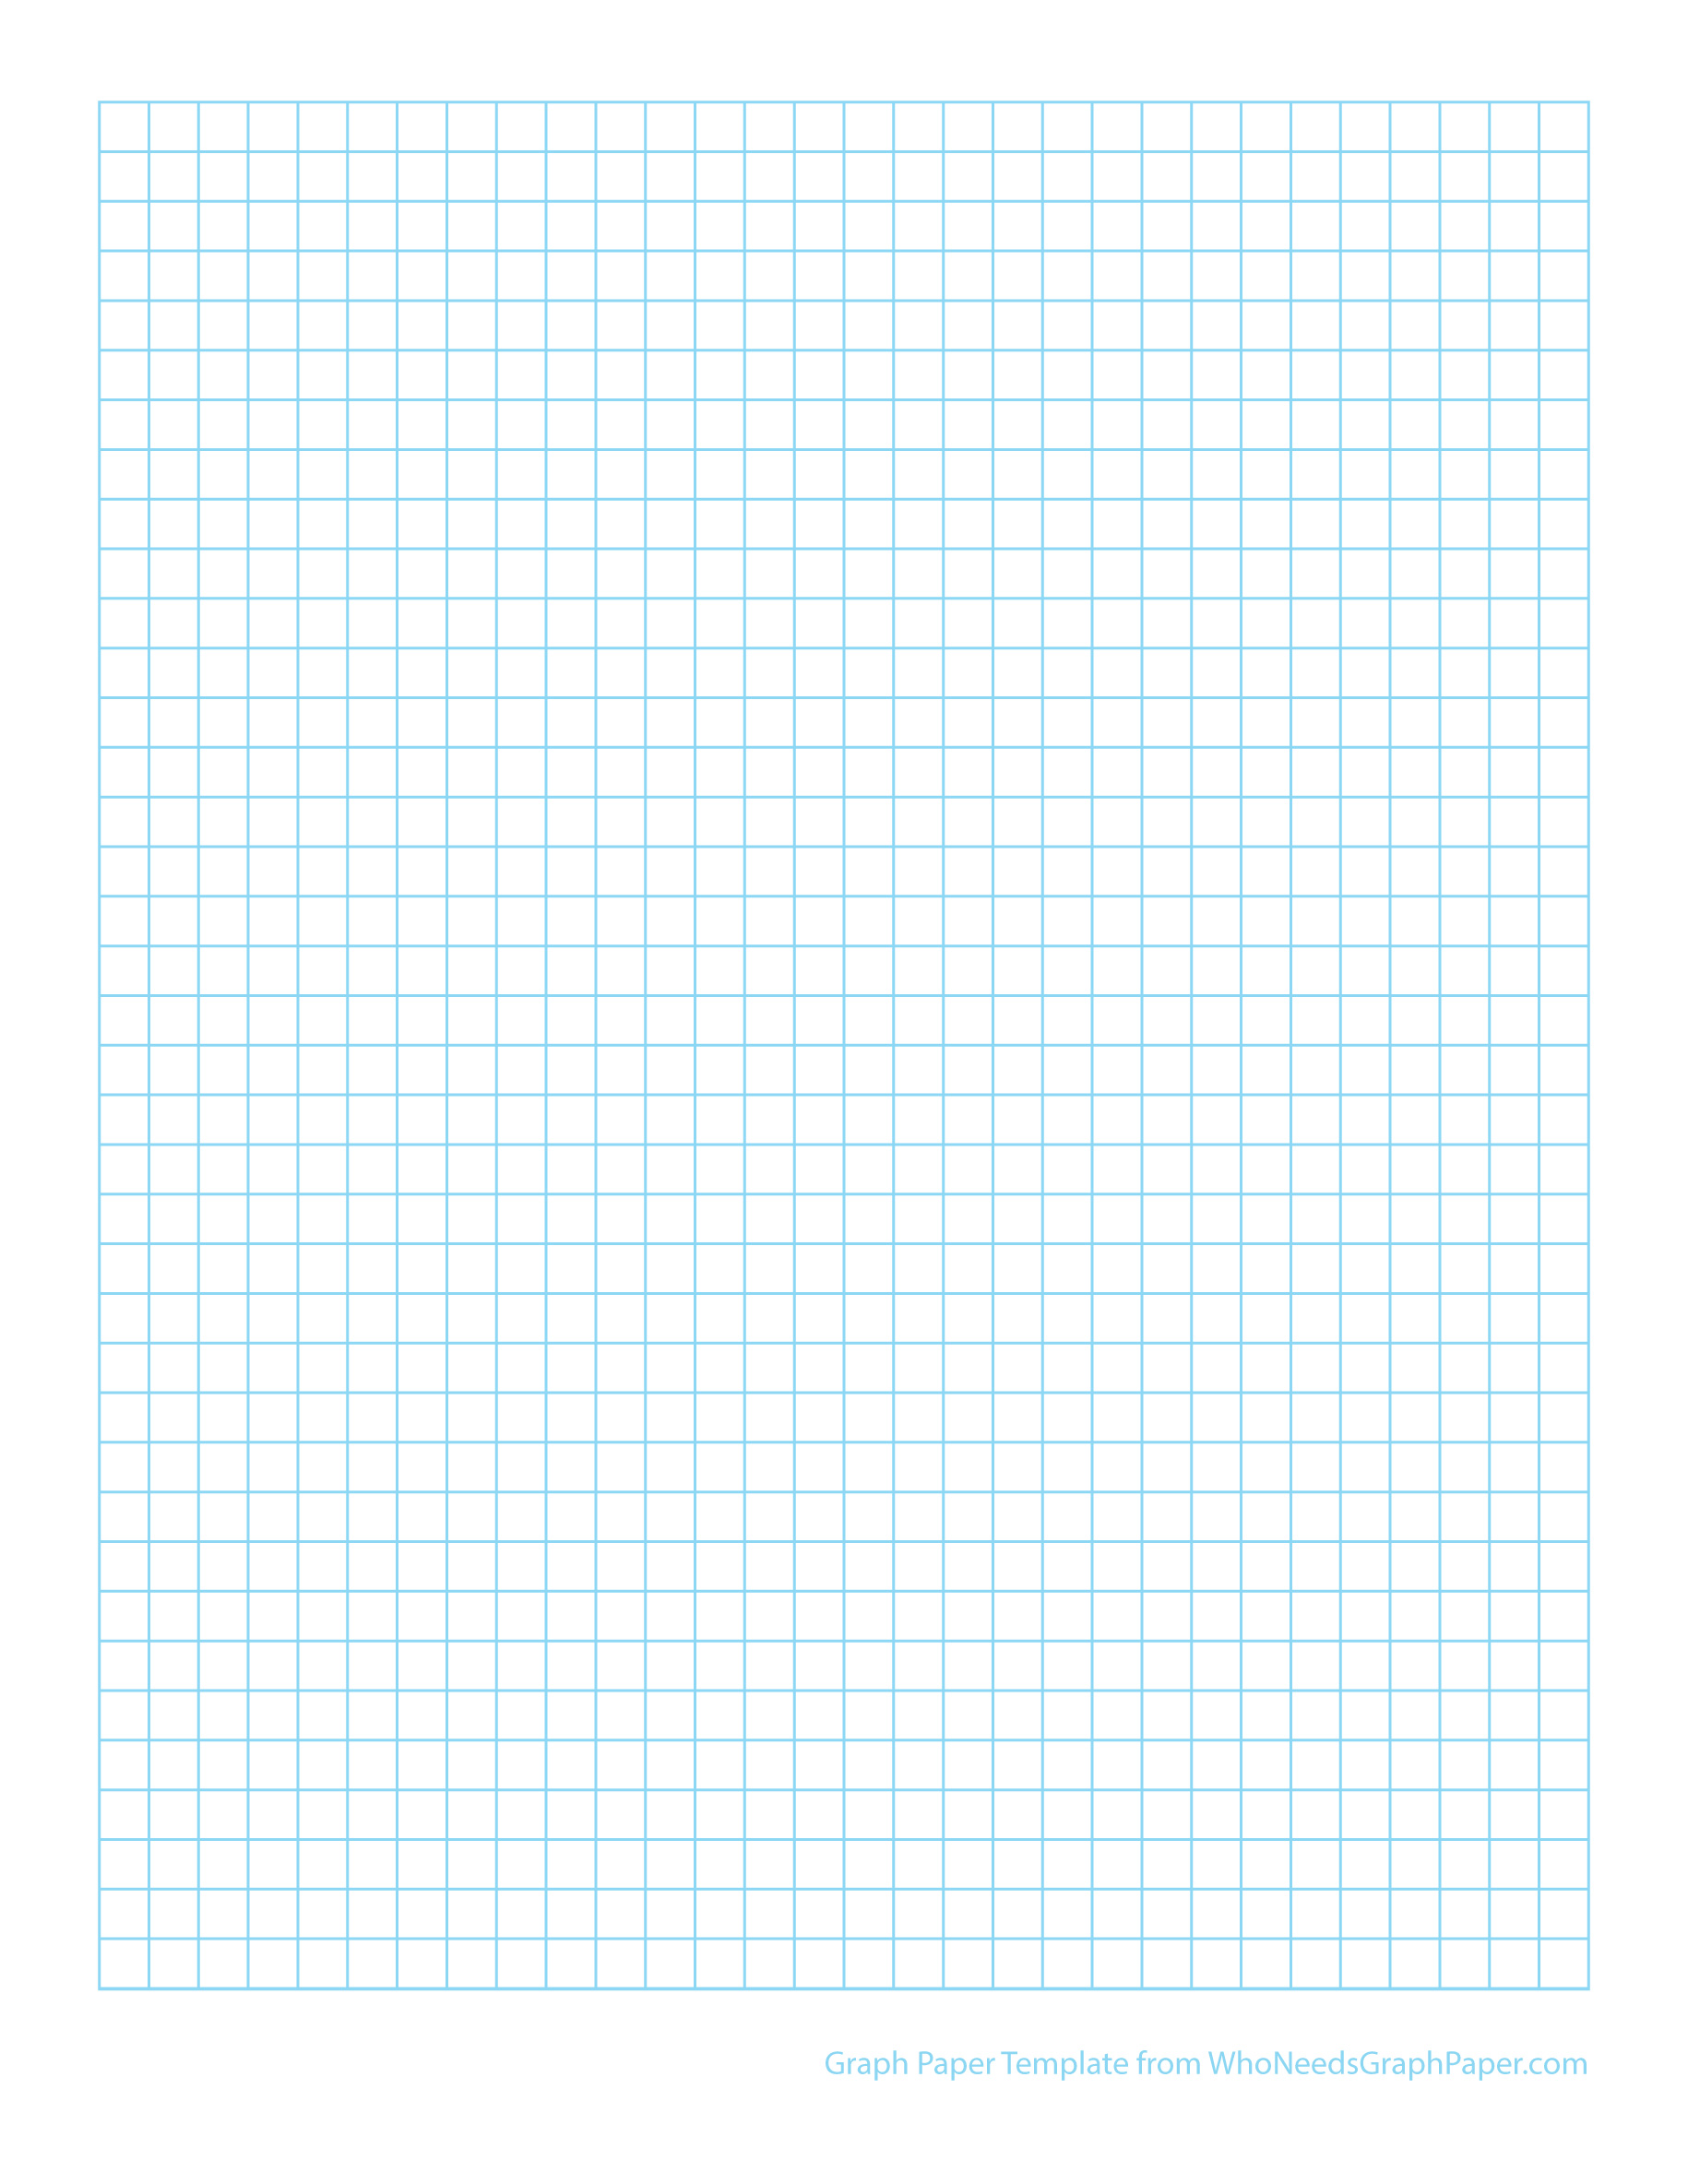 Graph Paper Template   8+ Free Word, PDF Documents Download | Free 